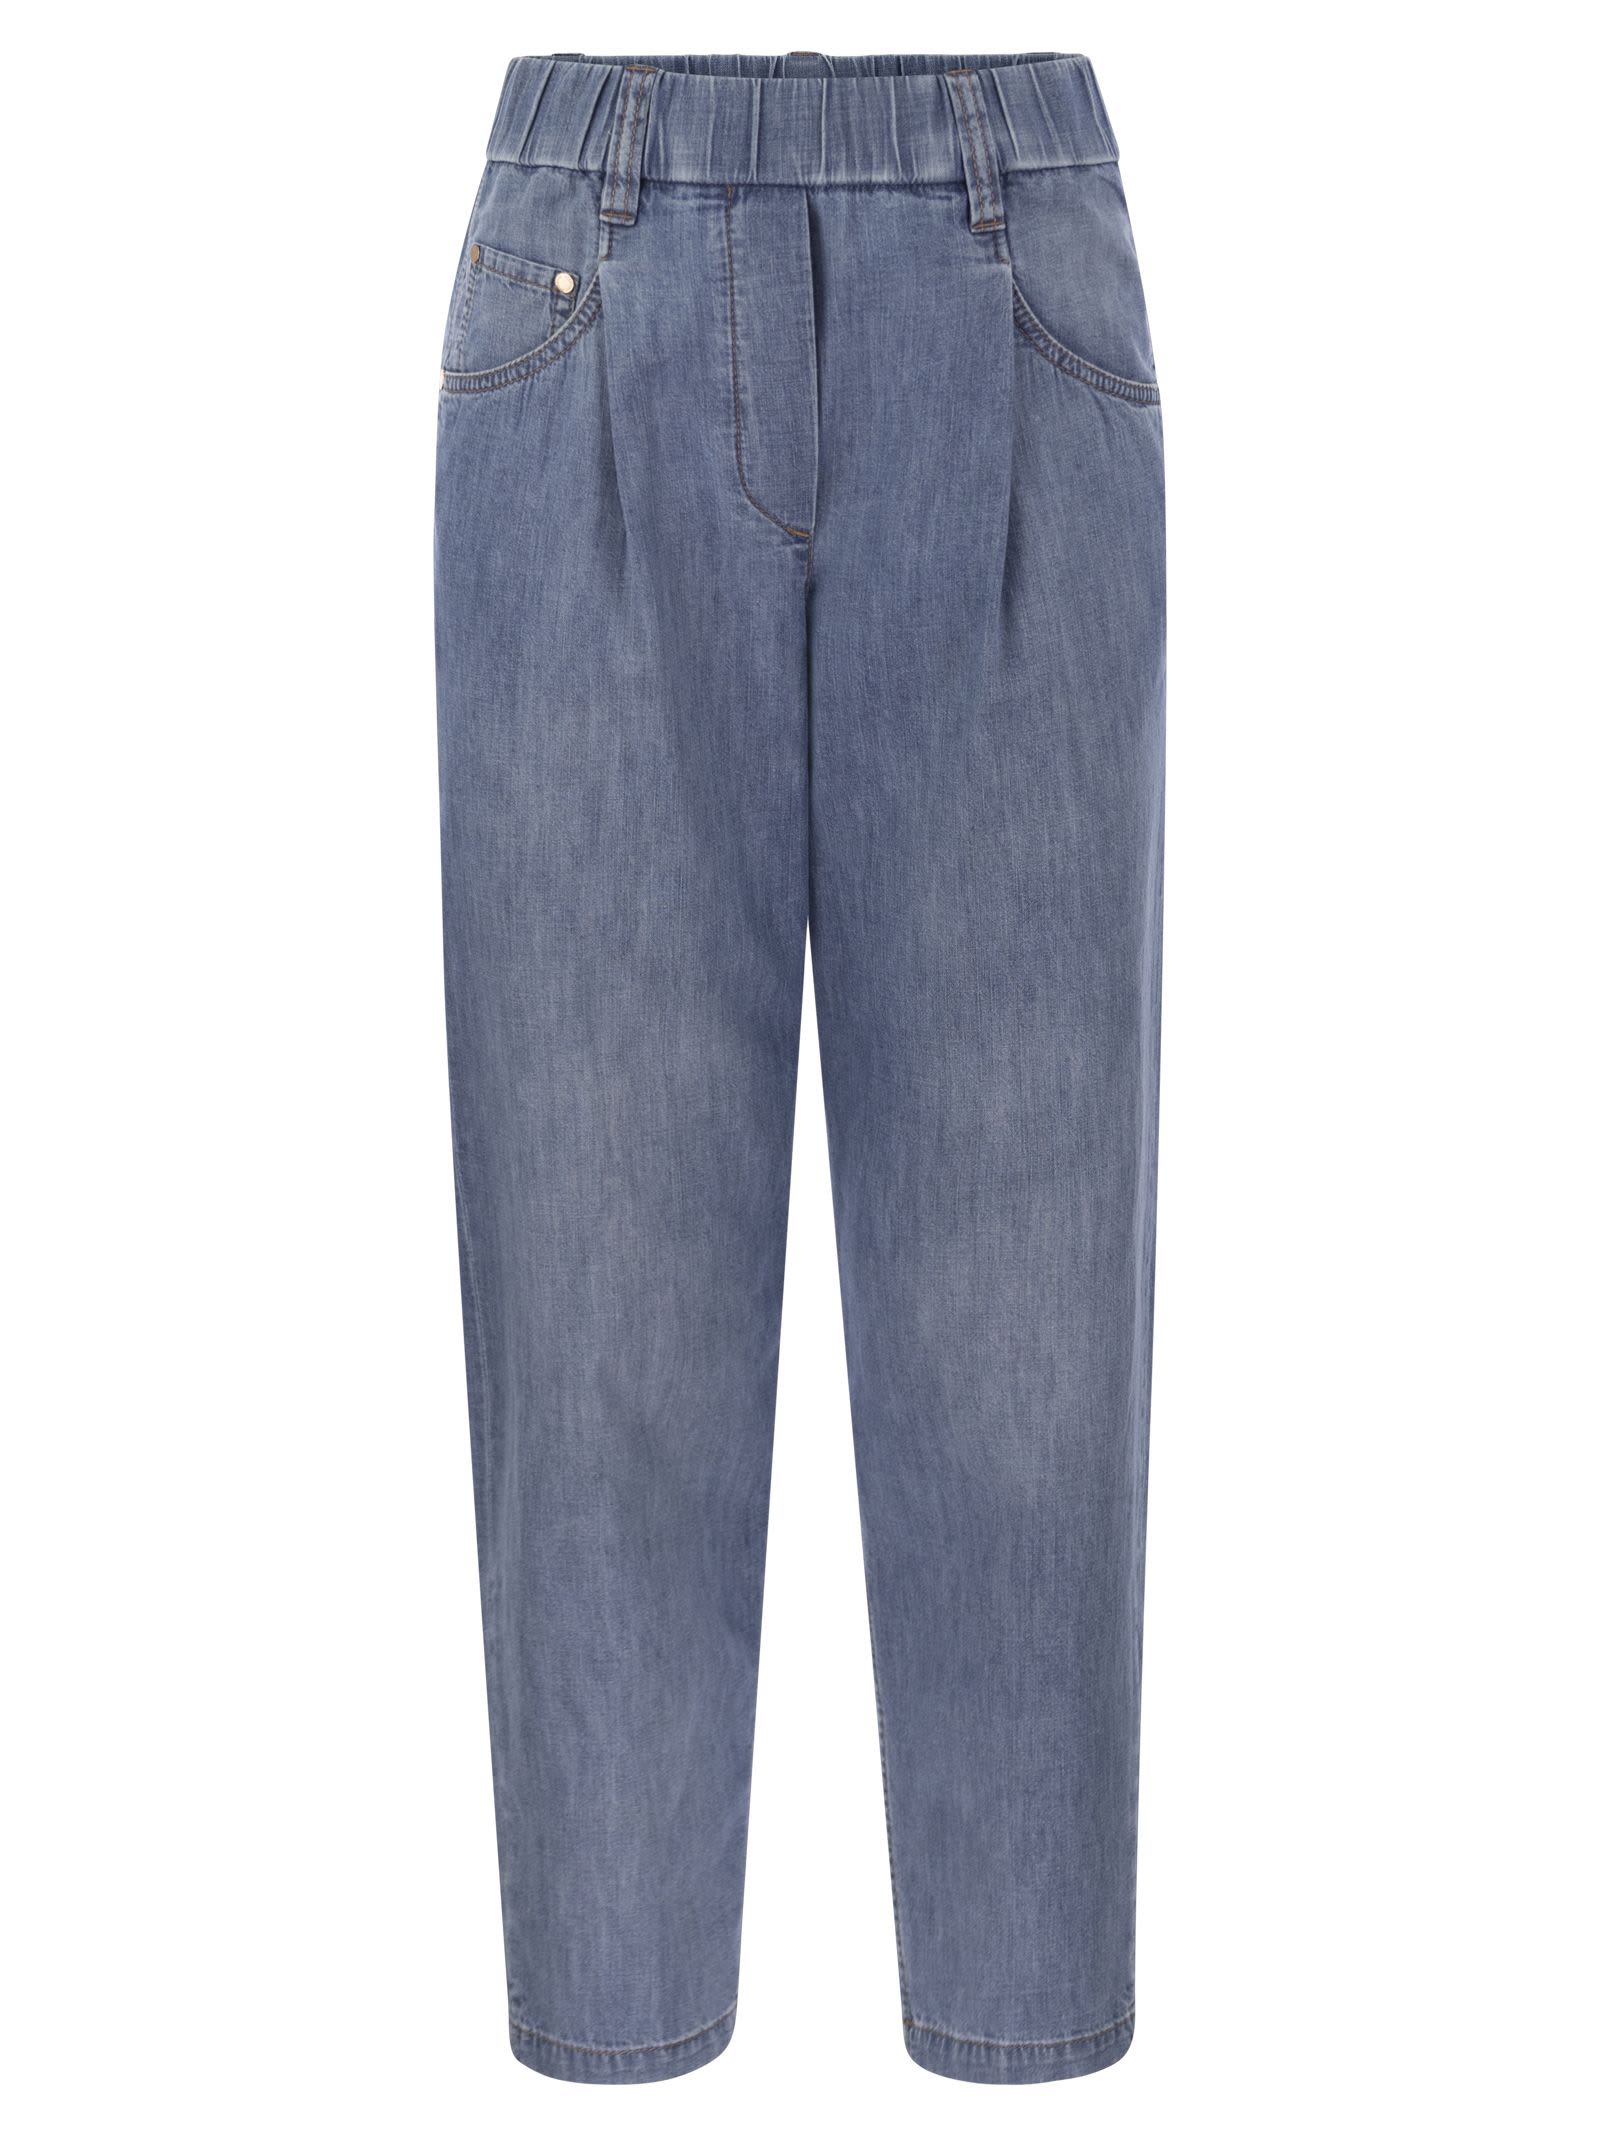 Lightweight Denim Baggy Trousers With Shiny Tab